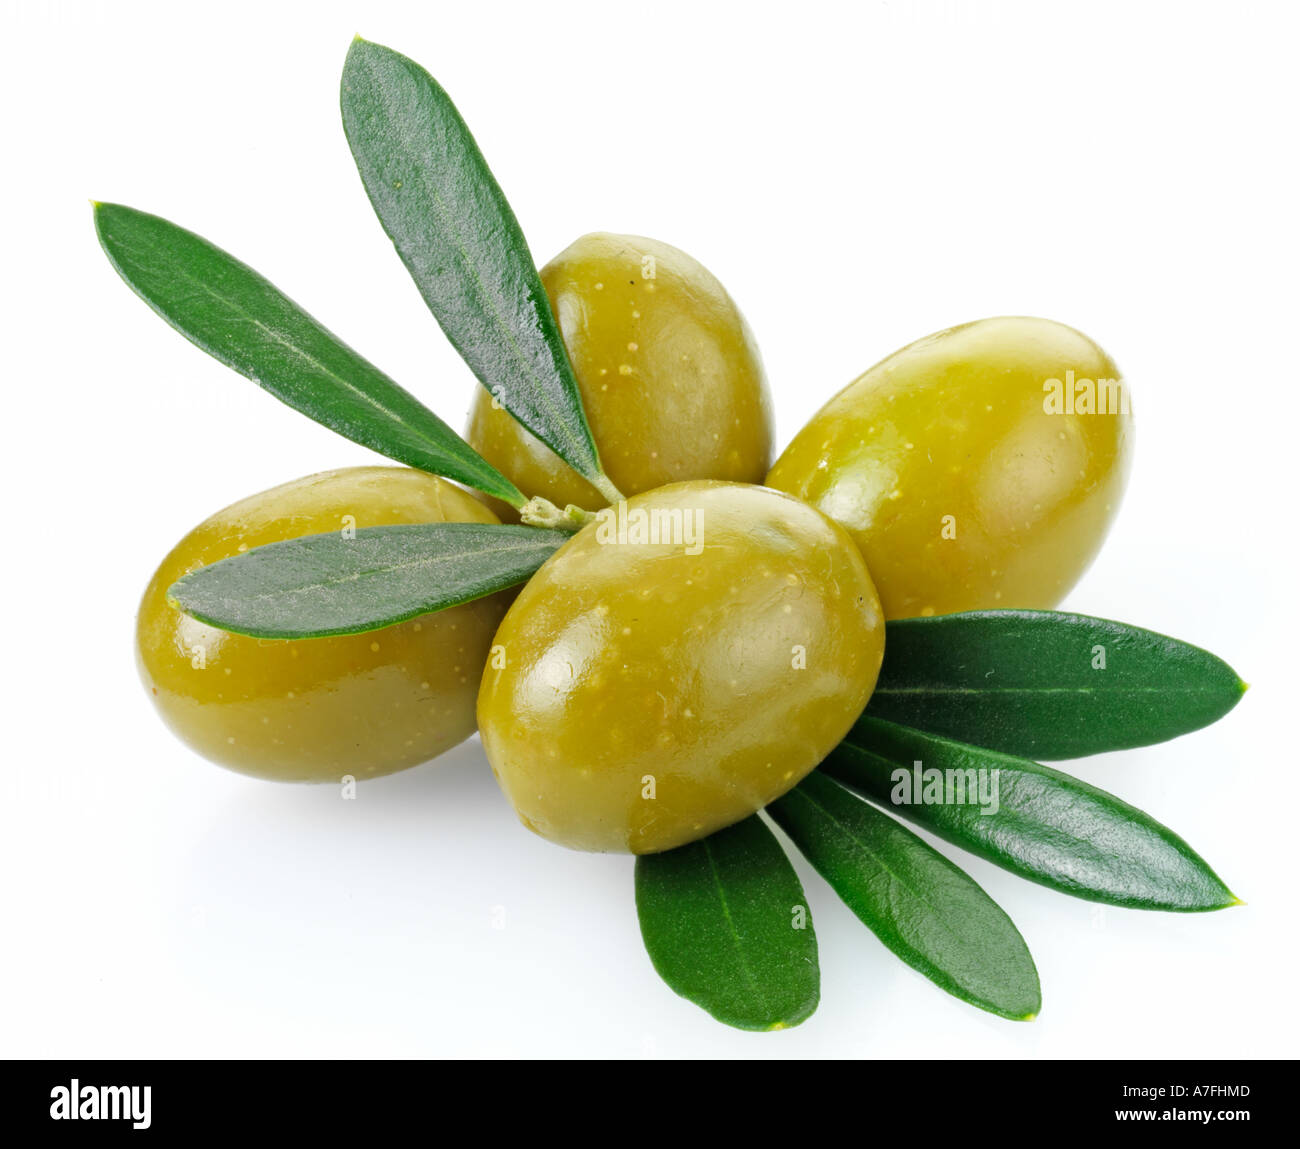 FOUR GREEN OLIVES Stock Photo